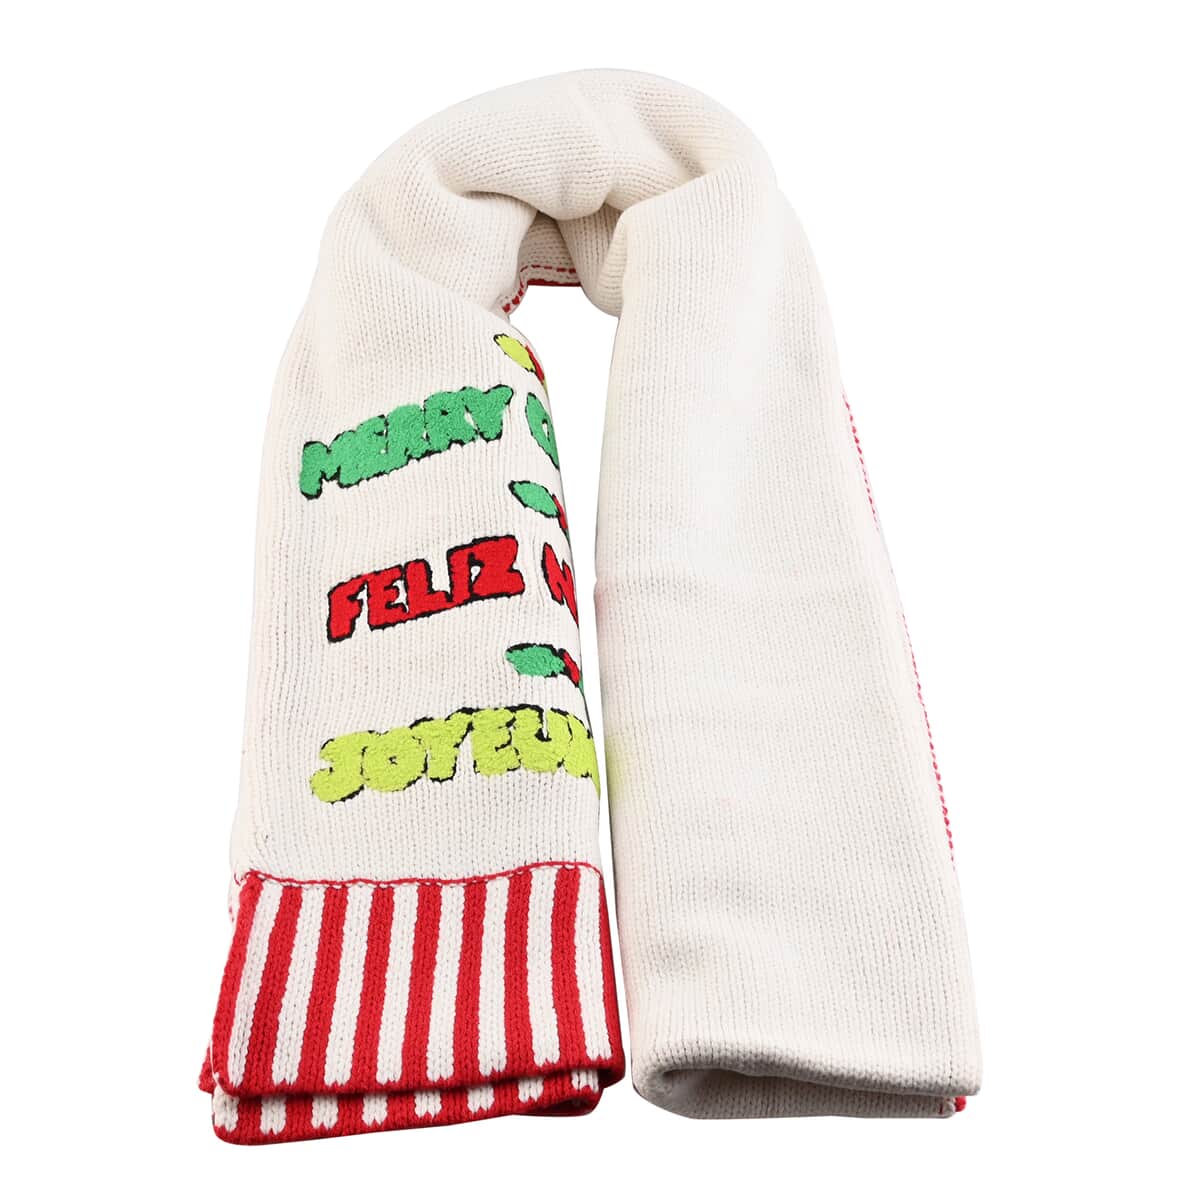 WHOOPI GOLDBERG Holiday Collection Merry Christmas Greetings Scarf - One Size Fits Most (MADE IN THE USA) image number 0